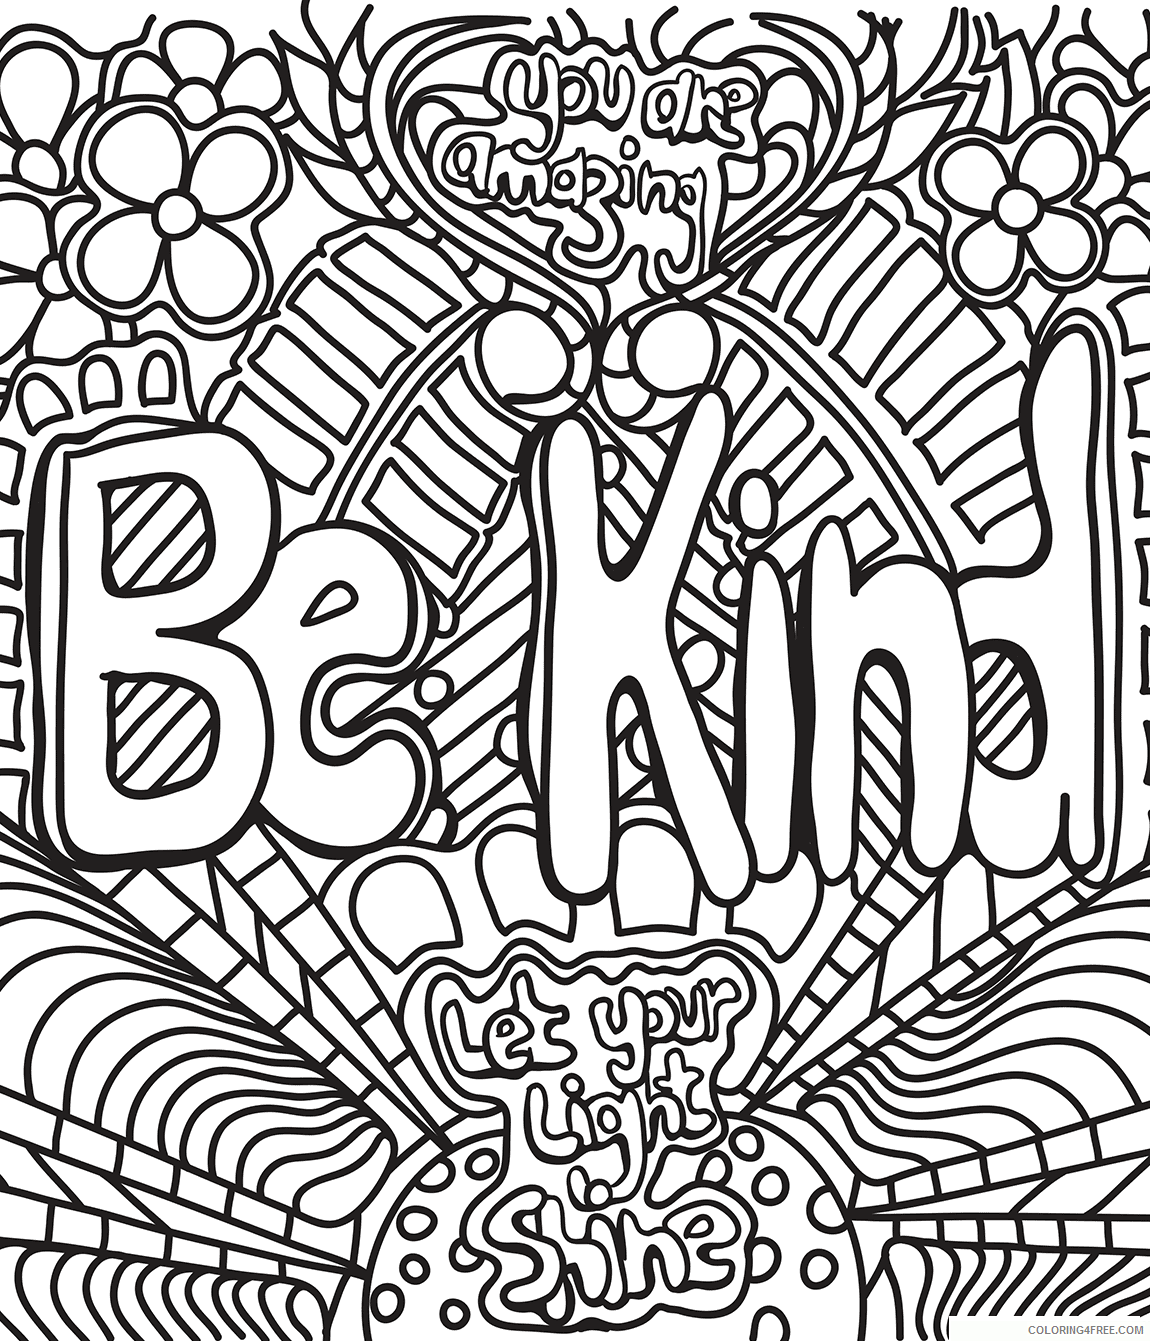 Anything Coloring Pages Printable Sheets Be Kind Printable 2021 a 1721 Coloring4free